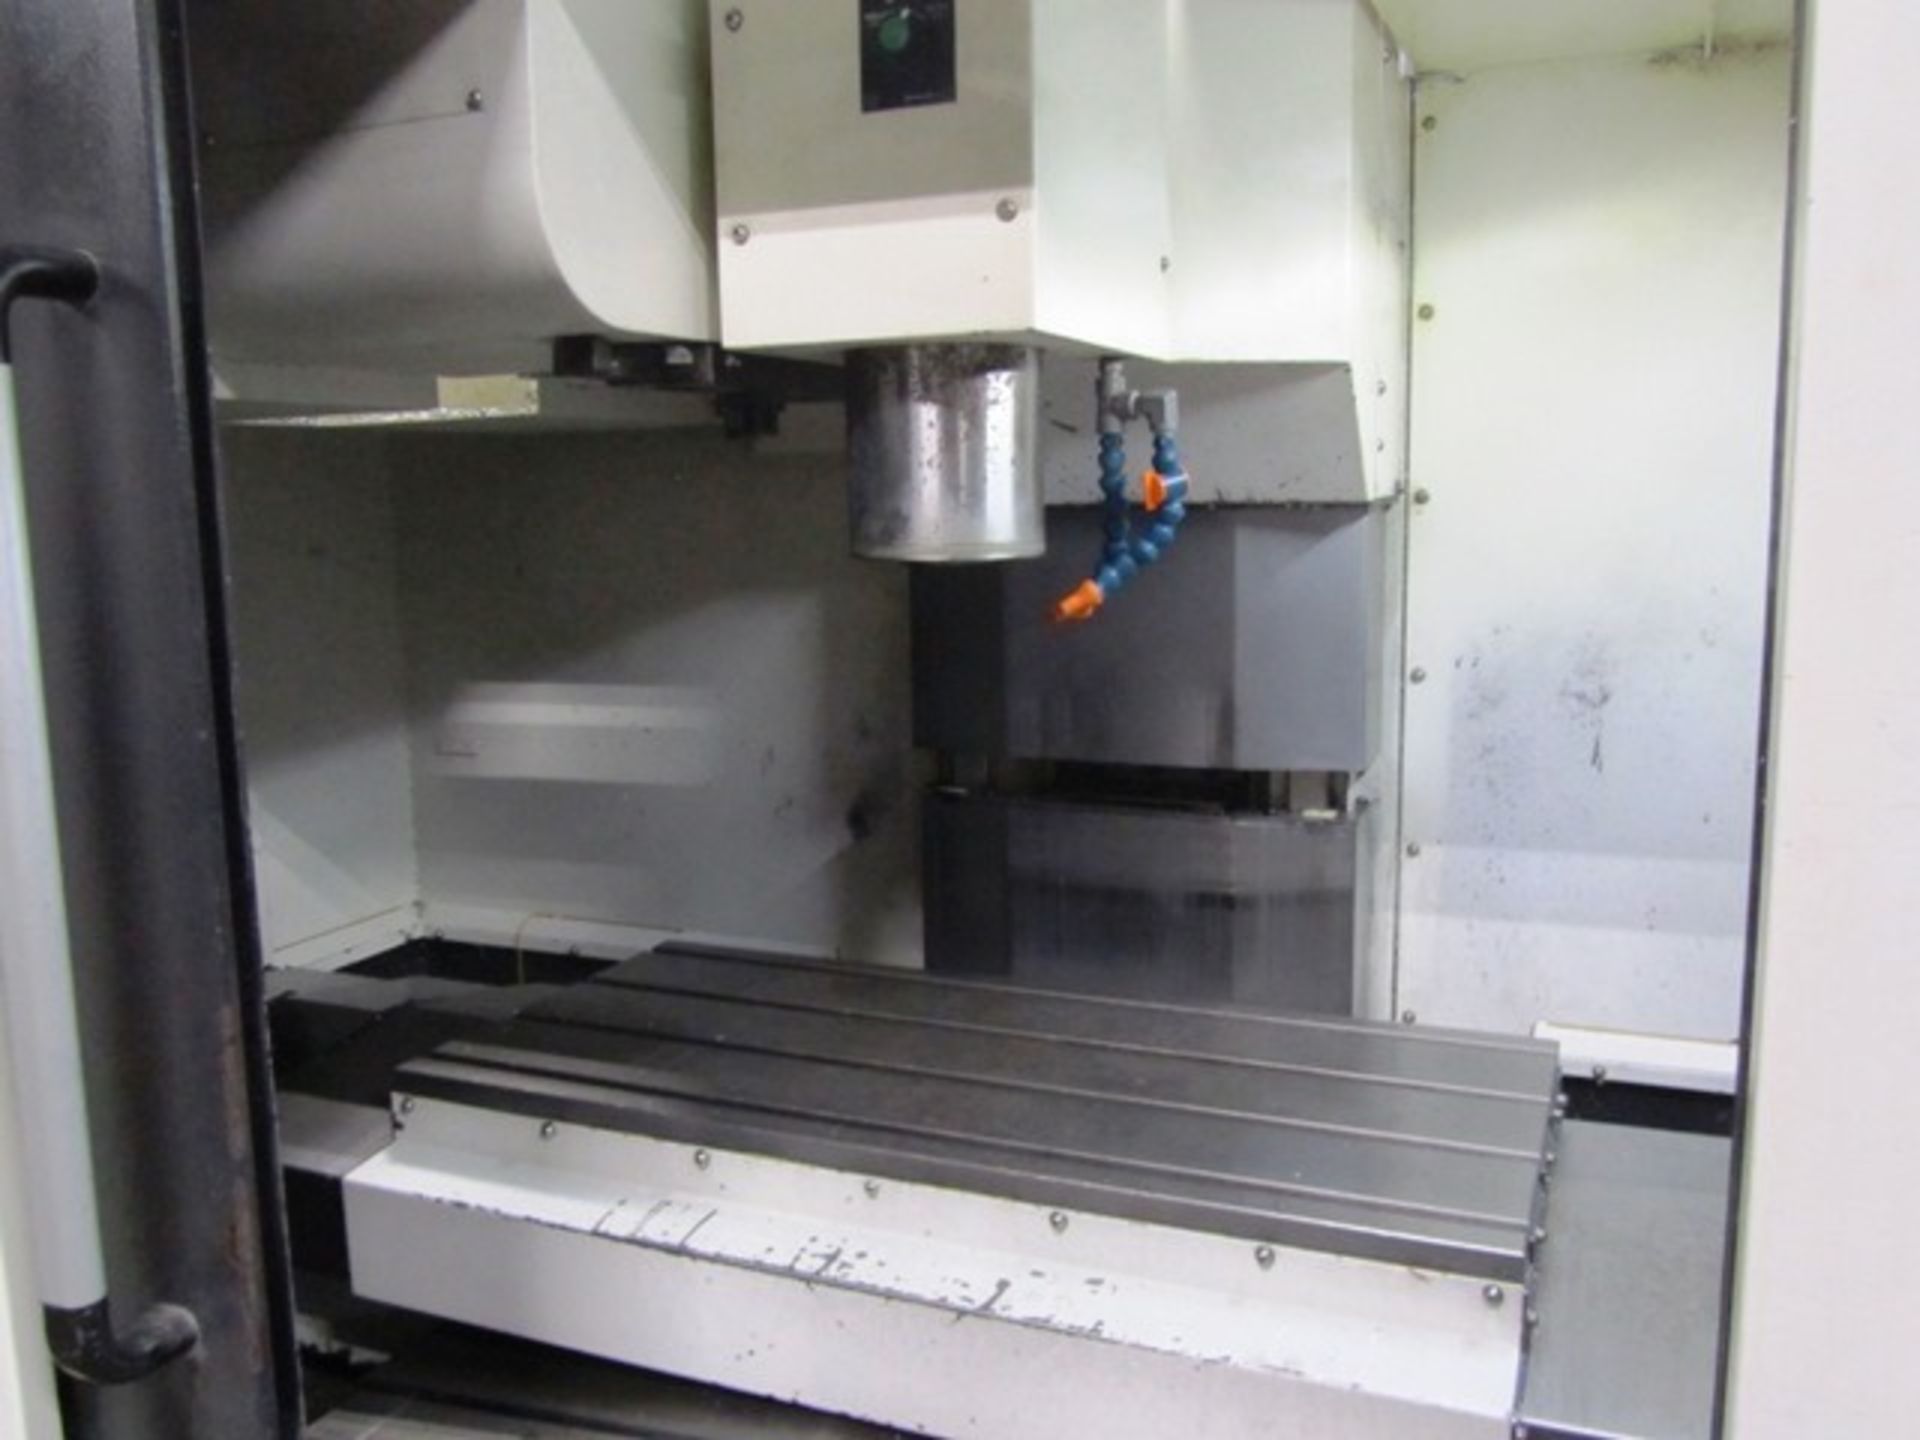 Hyundai WIA F400 CNC Vertical Machining Center with 39'' x 18'' Worktable, #40 Taper Spindles Speeds - Image 6 of 6